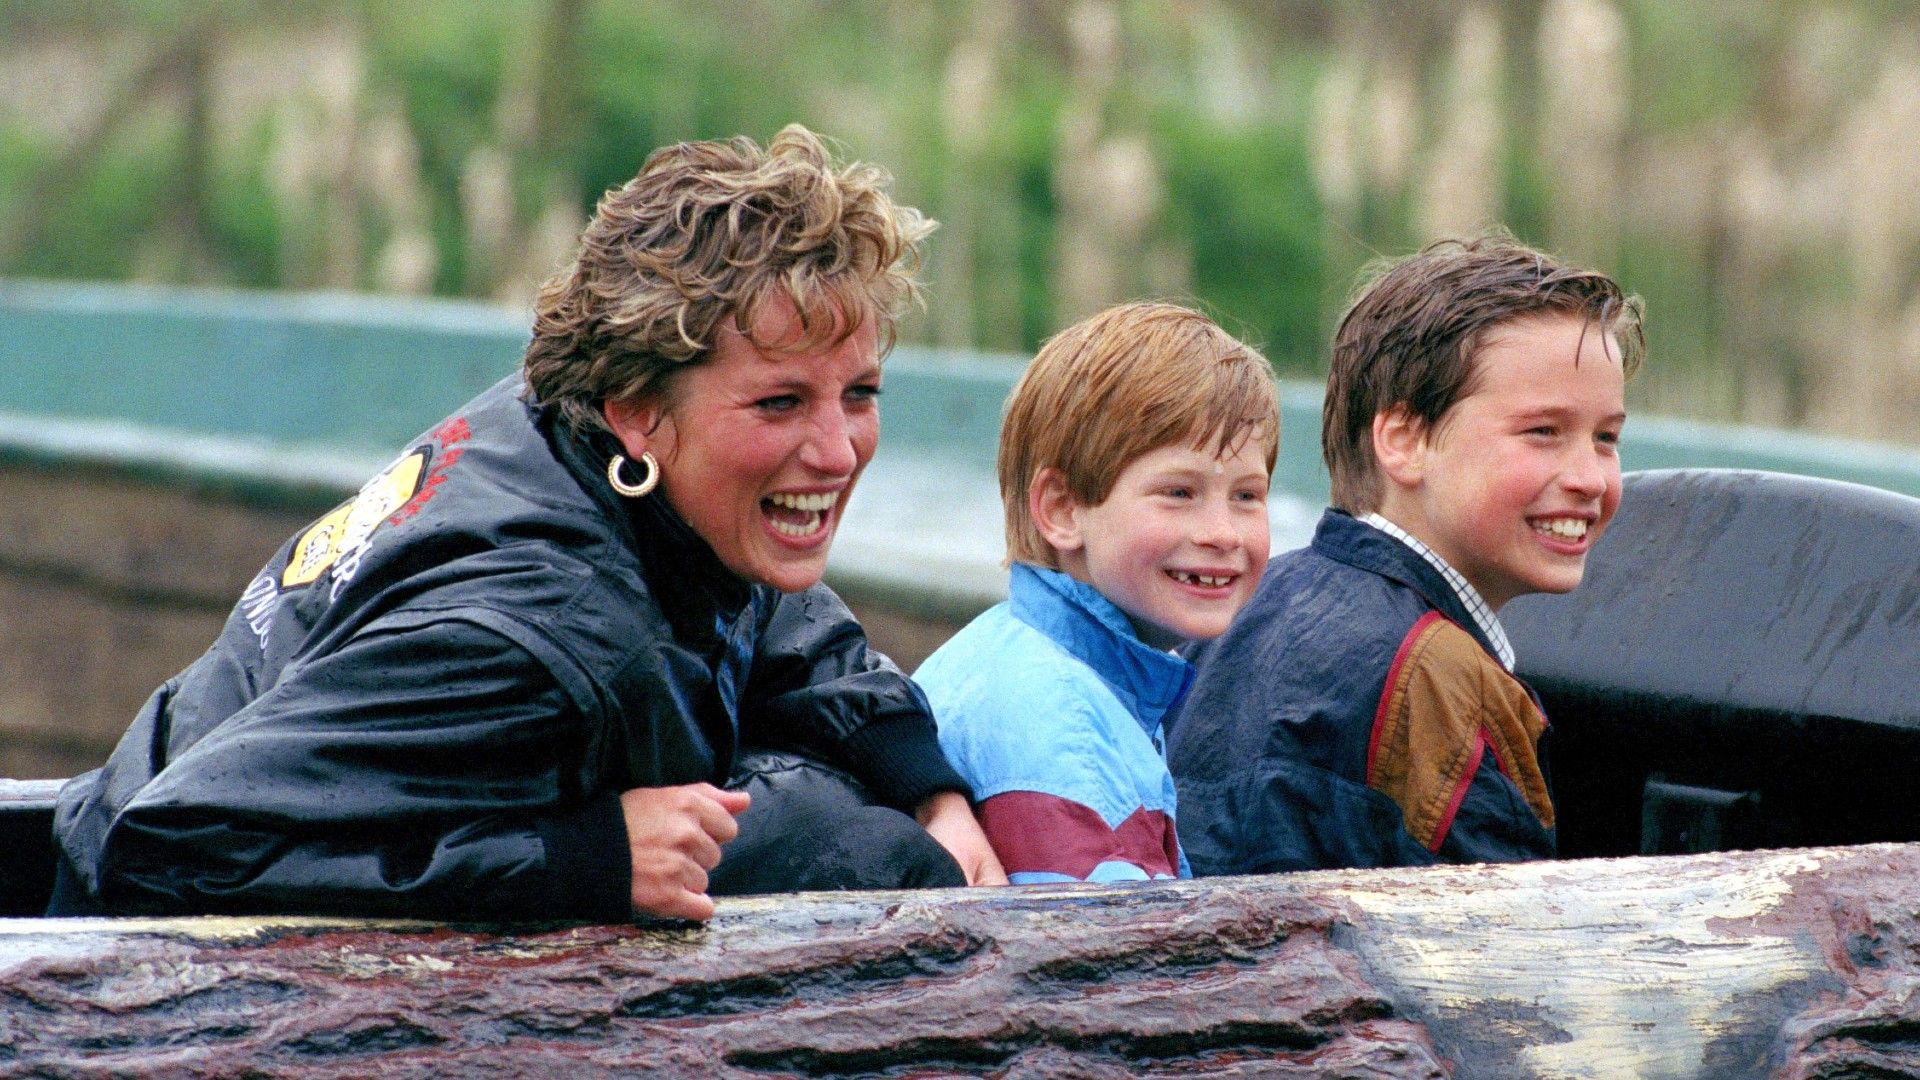 <p>                     Princess Diana was a fun mum, and the evidence is all over her son's beaming faces as she tried to help them experience some normal childhood memories during a visit to Thorpe Park in 1993.                   </p>                                      <p>                     Touching on the heart-warming way Diana raised him and his brother, Harry paid tribute at a tenth-anniversary service in 2007.                   </p>                                      <p>                     Per <a href="http://news.bbc.co.uk/1/hi/uk/6972412.stm">BBC</a>, he said, "William and I can separate life into two parts. There were those years when we were blessed with the physical presence beside us of both our mother and father.                   </p>                                      <p>                     "And then there are the 10 years since our mother’s death. When she was alive we completely took for granted her unrivalled love of life, laughter, fun and folly. She was our guardian, friend and protector."                   </p>